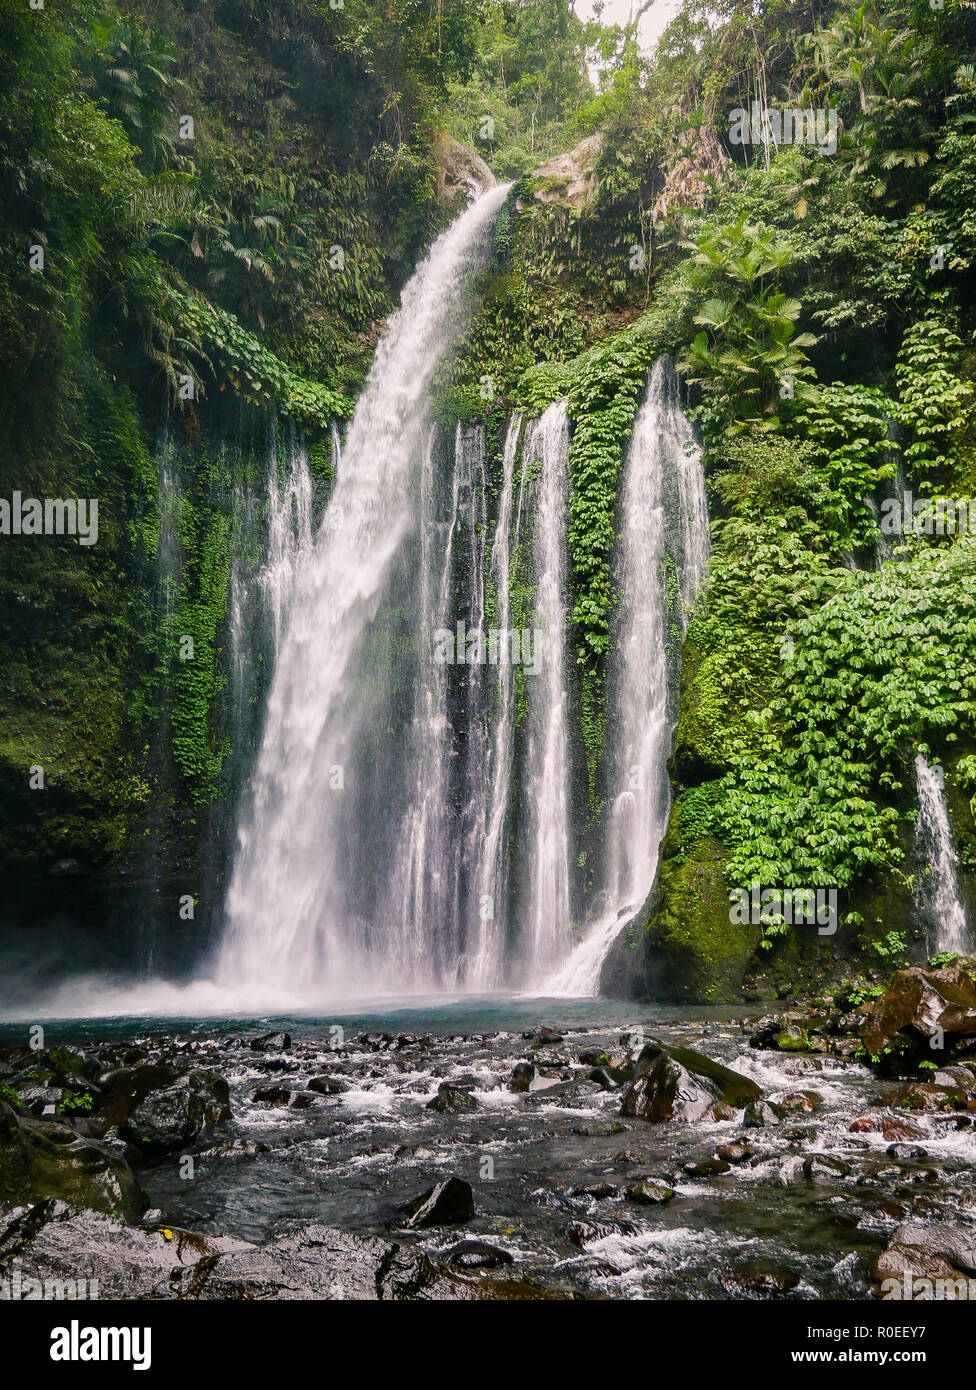 A waterfall in Indonesia - Lombok. Stock Photo